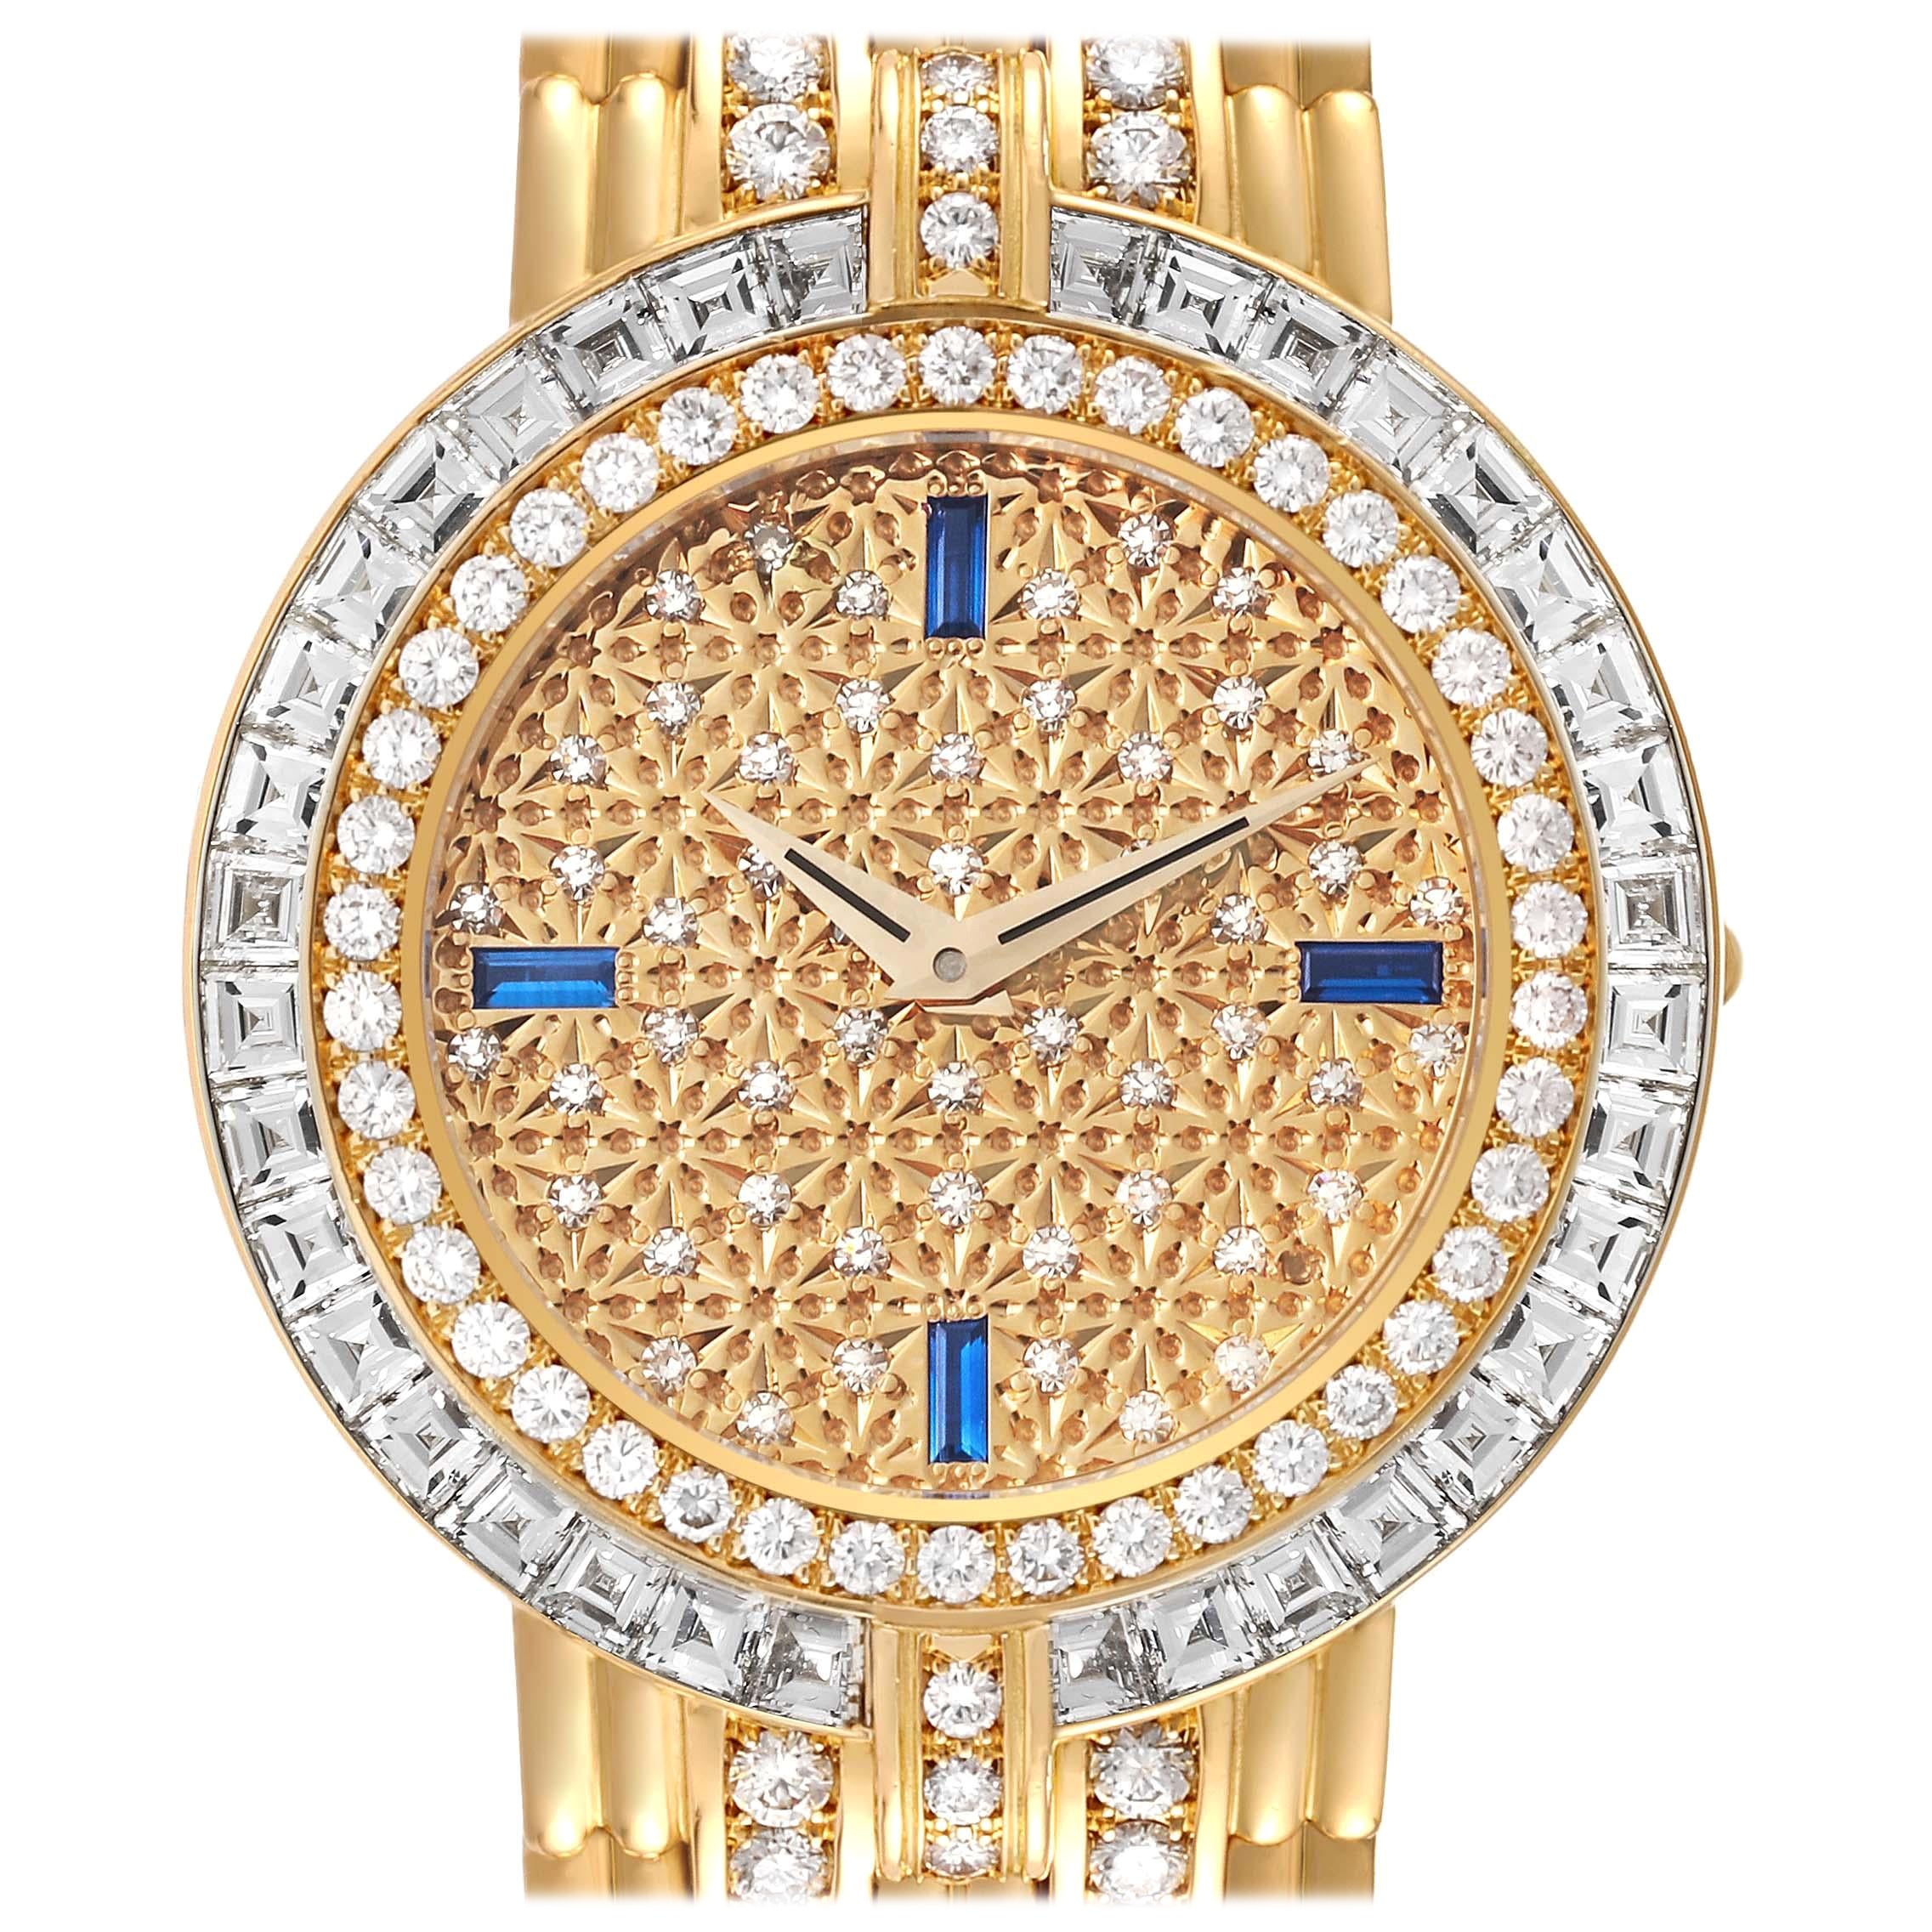 How much does it cost to put diamonds in a watch?